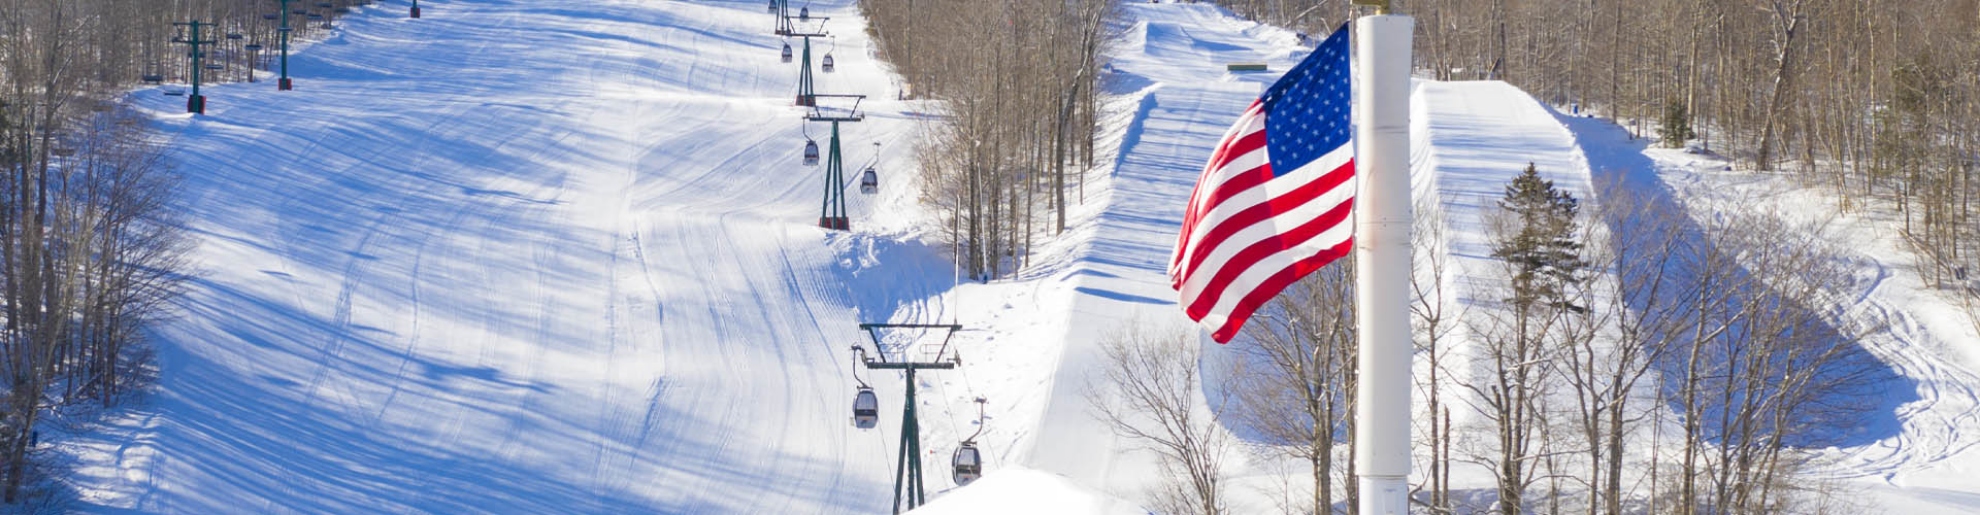 military discounted lift tickets